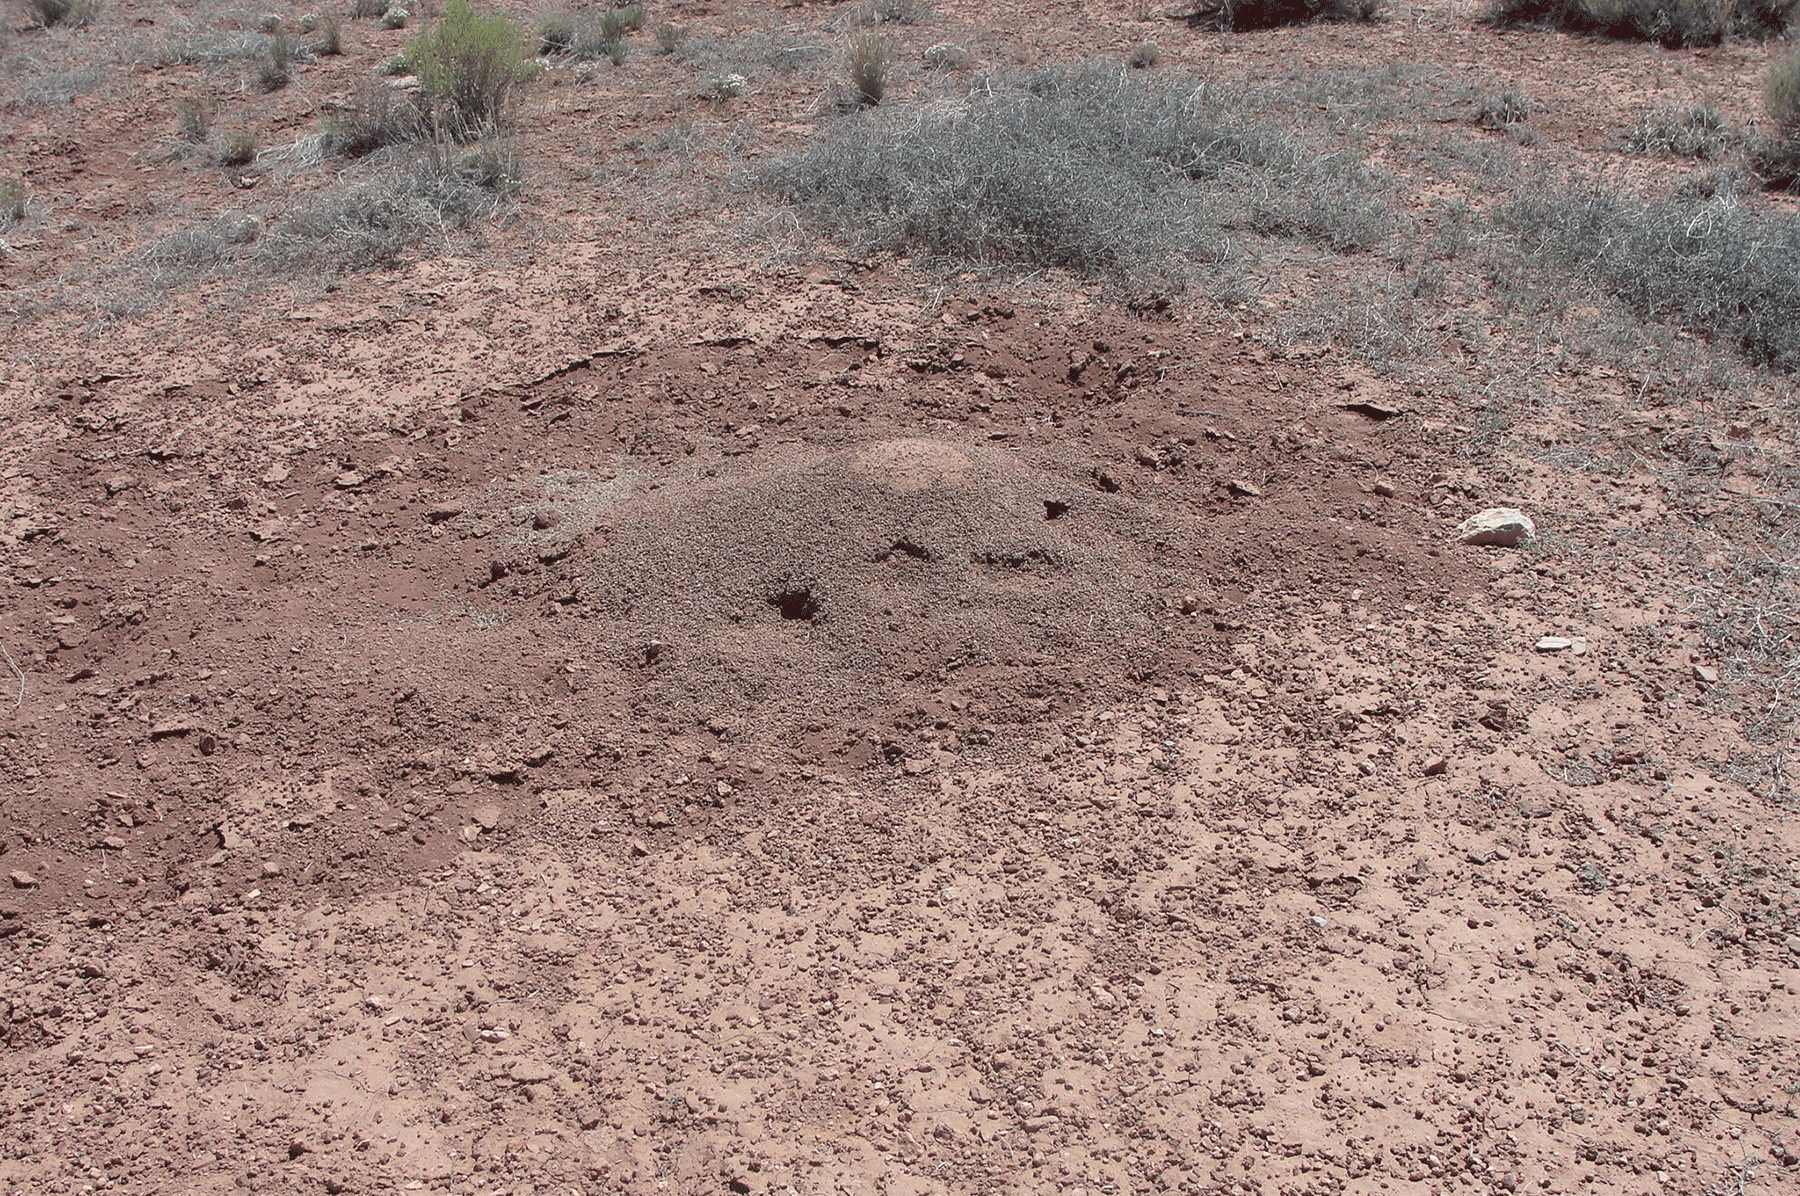 Western harvester ant hill